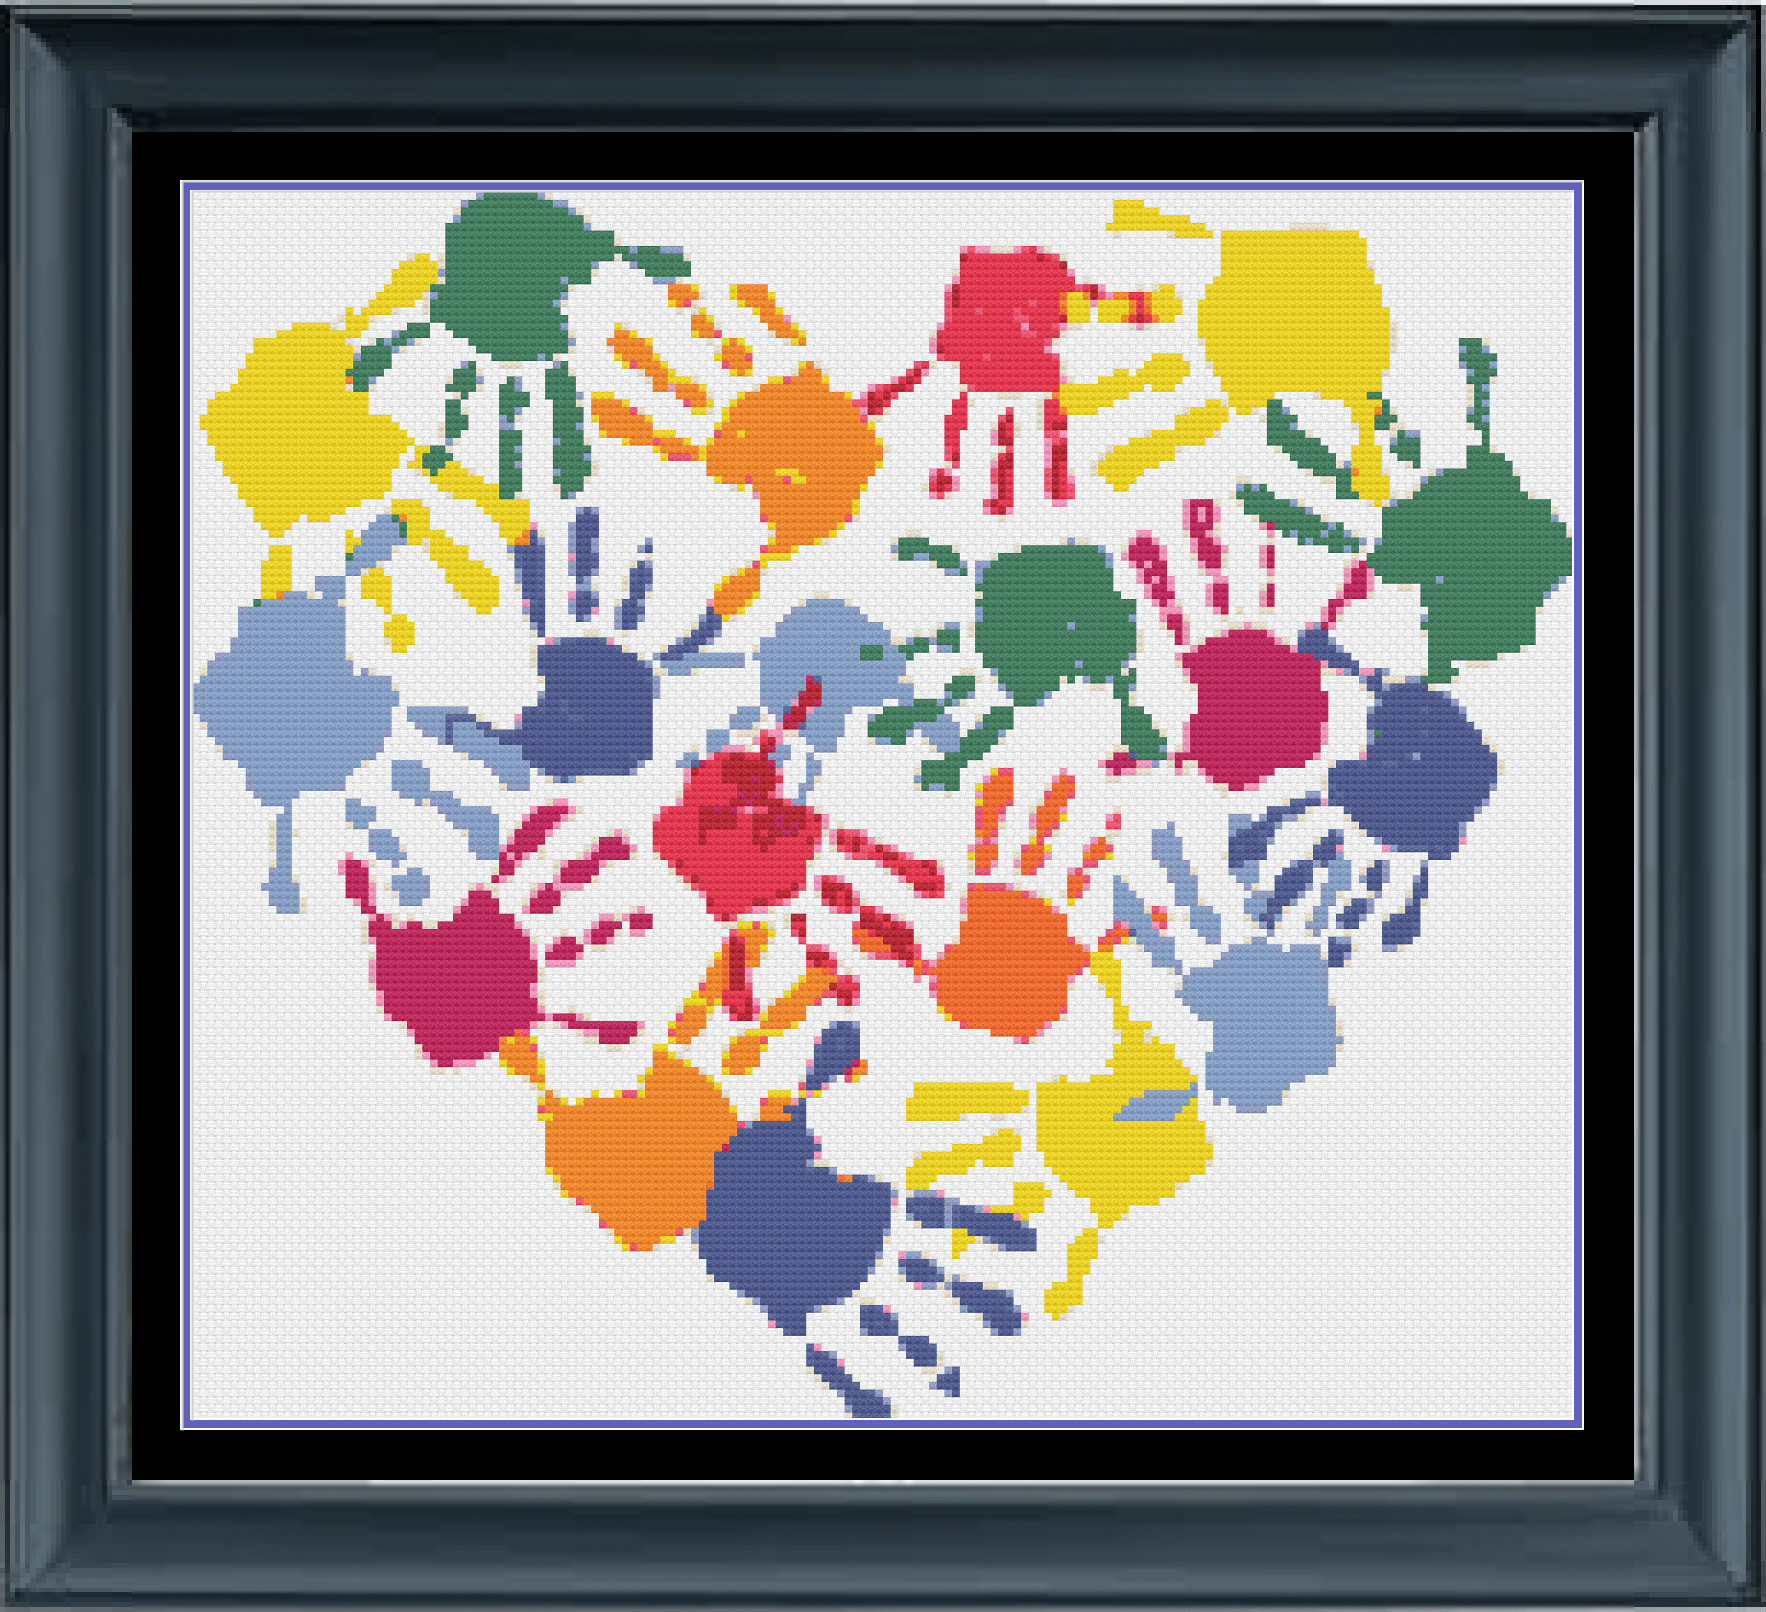 Stitching Jules Design Cross Stitch Pattern Instant PDF Download - $10 Hands Heart Cross Stitch Pattern | Love Cross Stitch Pattern | Instant PDF Download And Physical Pattern Options